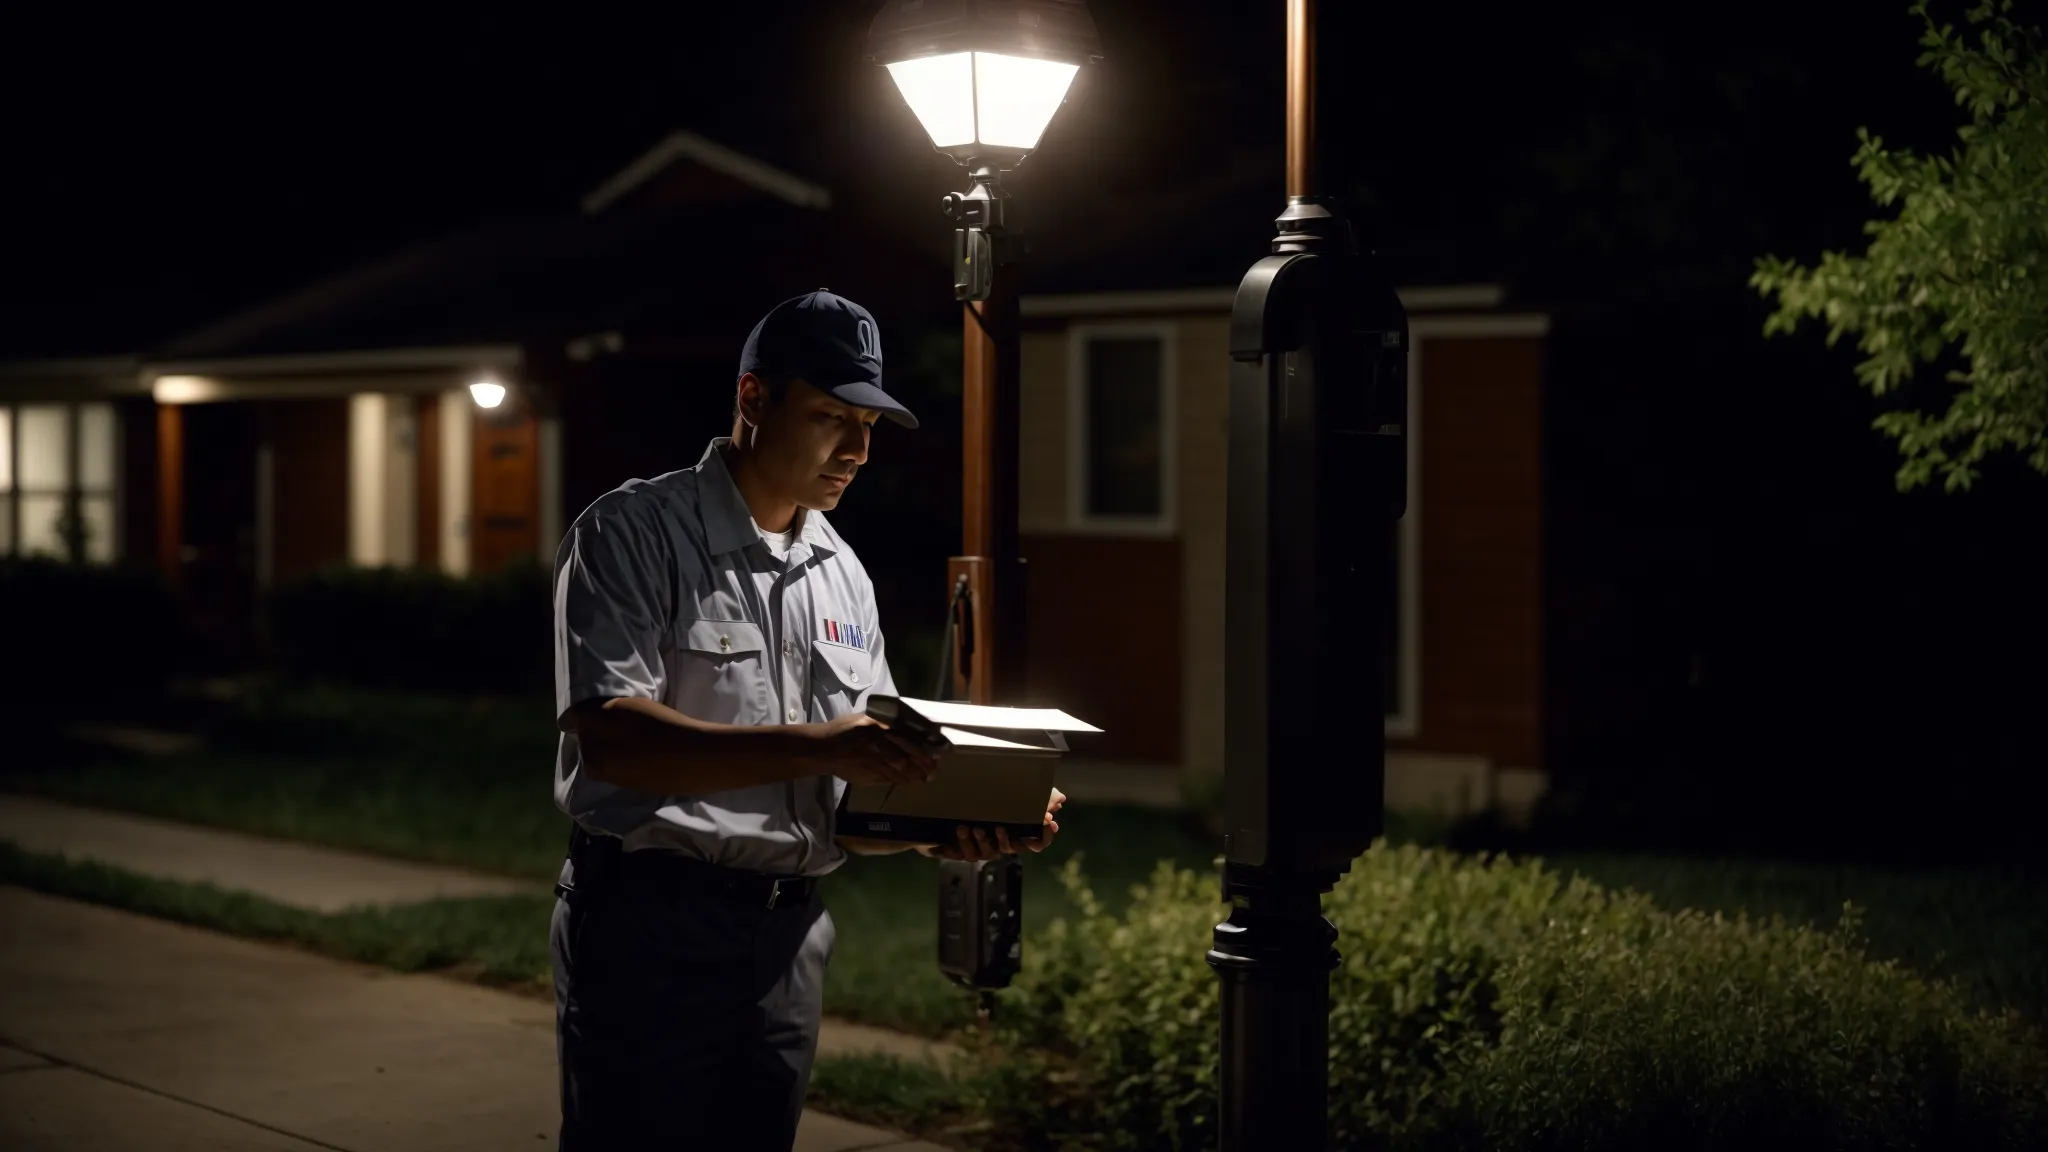 Resources for Mail Carriers